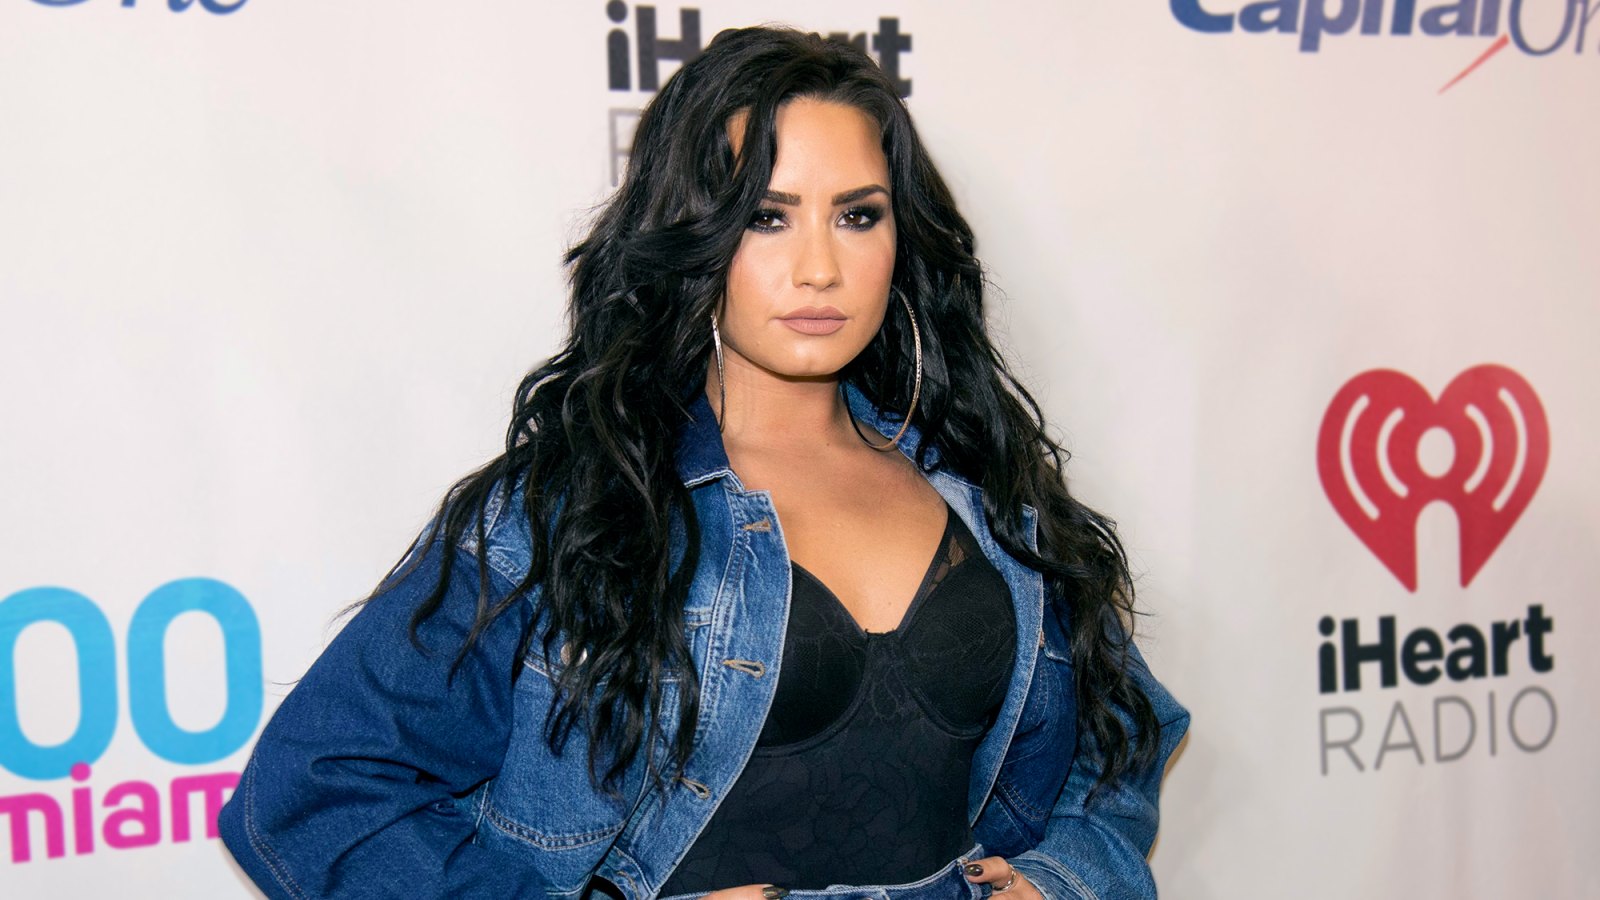 Demi Lovato Teases New Music Is on the Way For Her 'Loyal' Fans